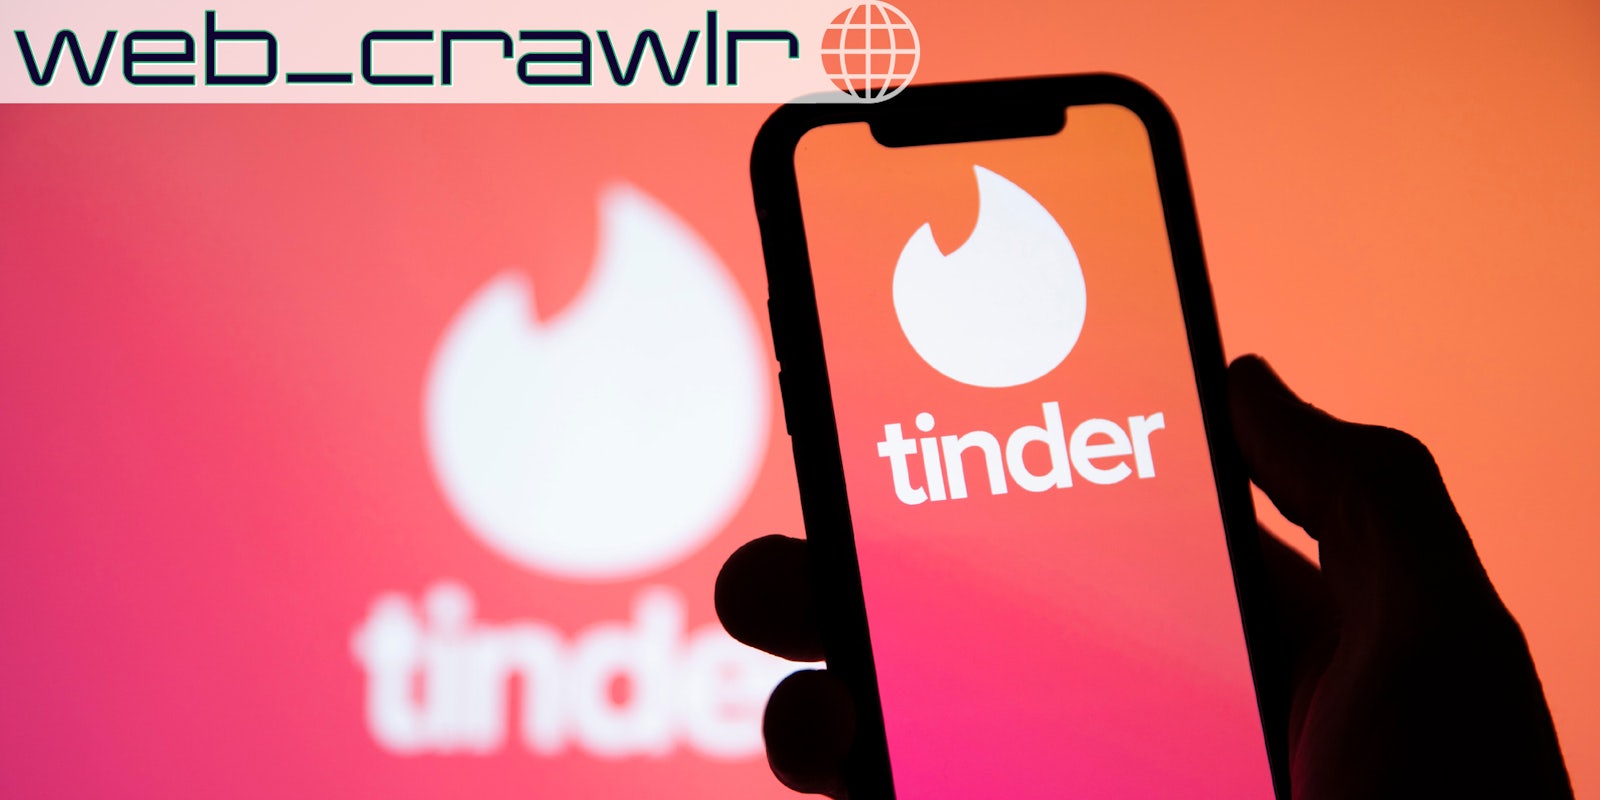 A phone with the Tinder app on it. The Daily Dot newsletter web_crawlr logo is in the top left corner.